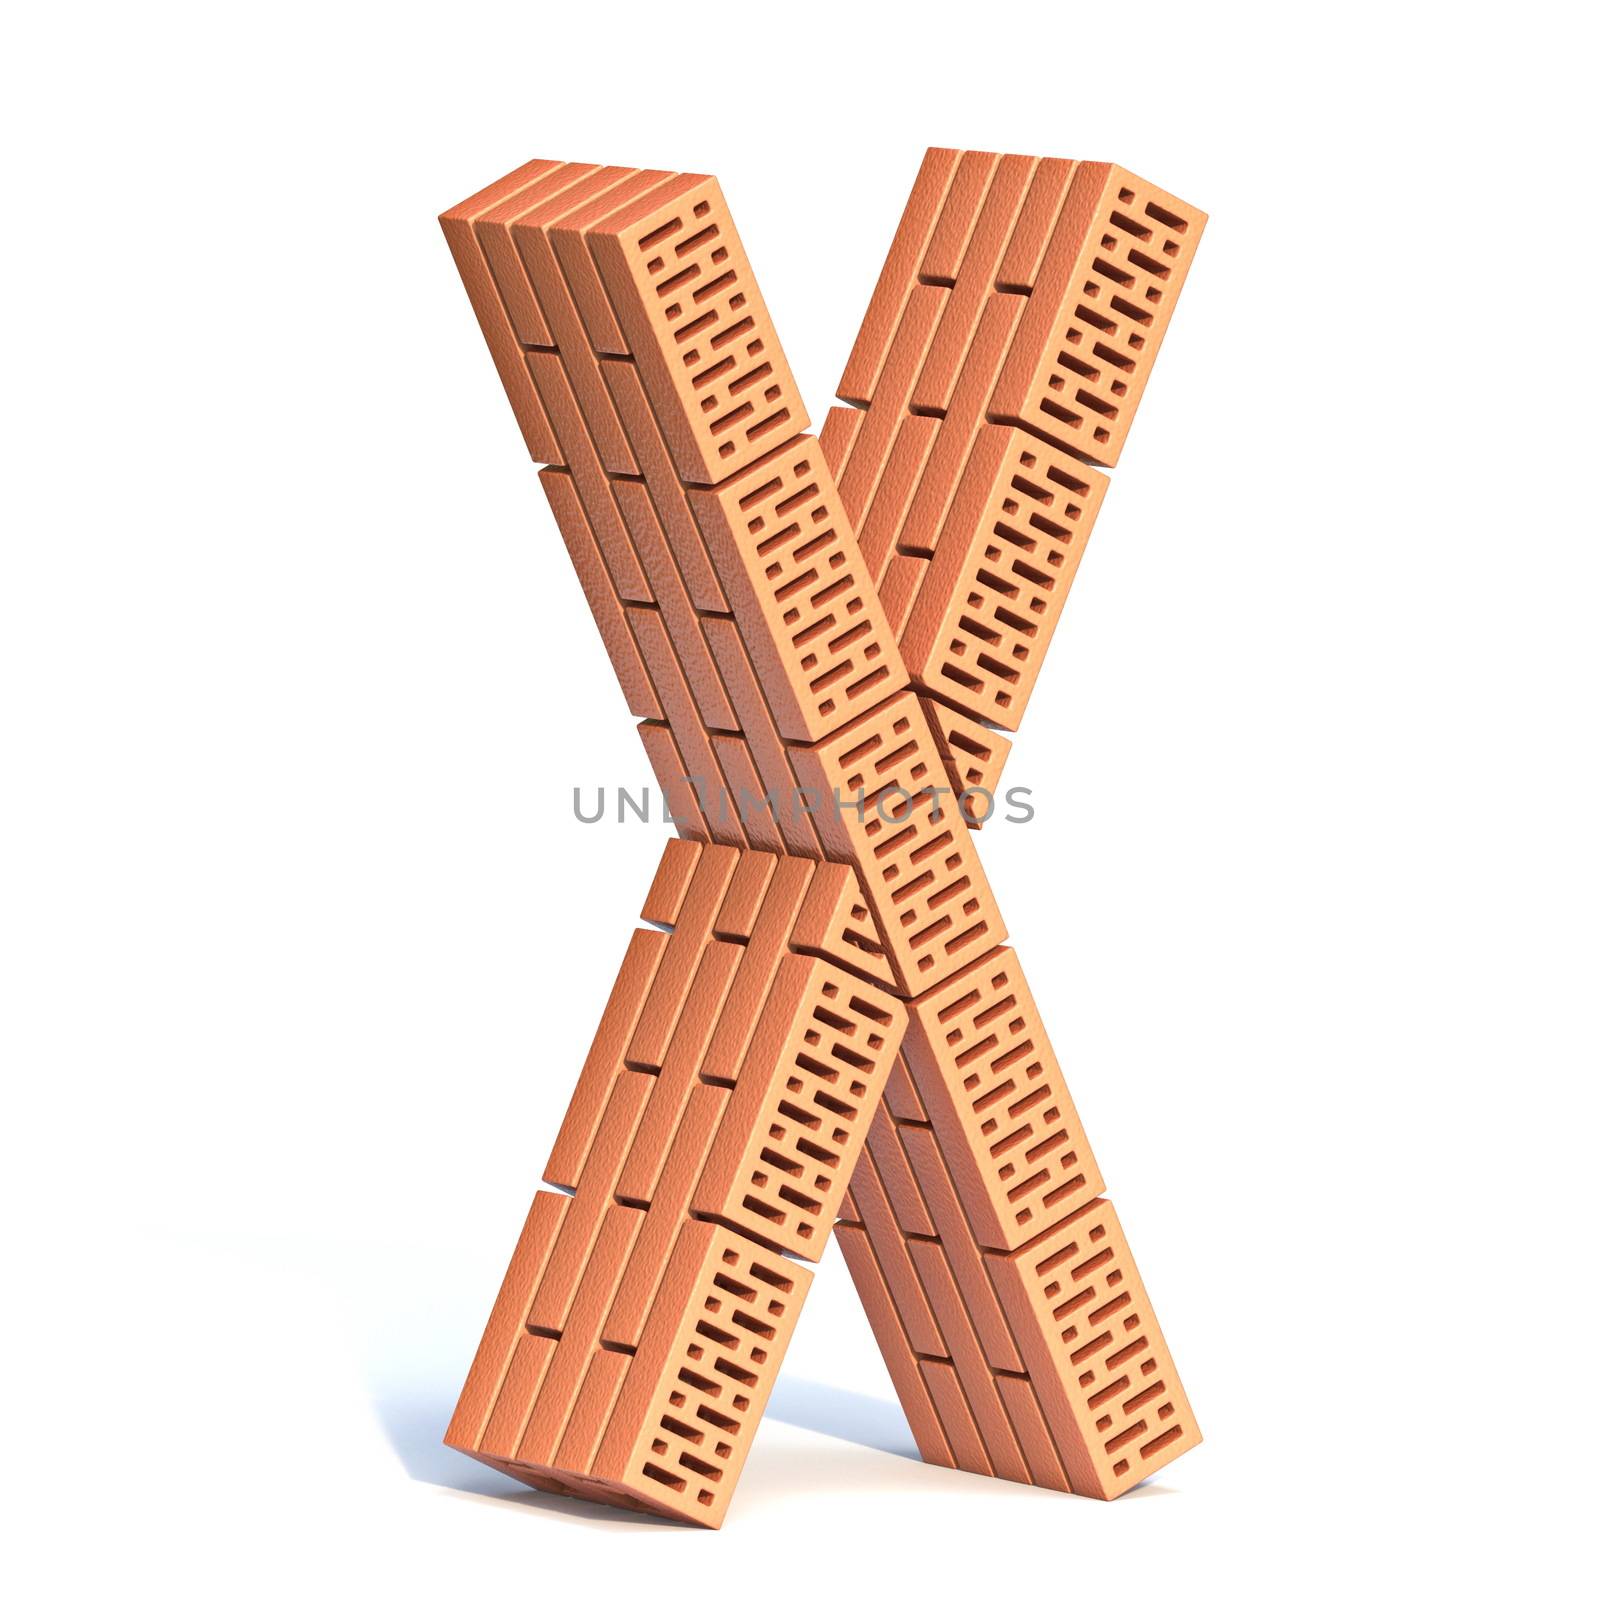 Brick wall font Letter X 3D by djmilic